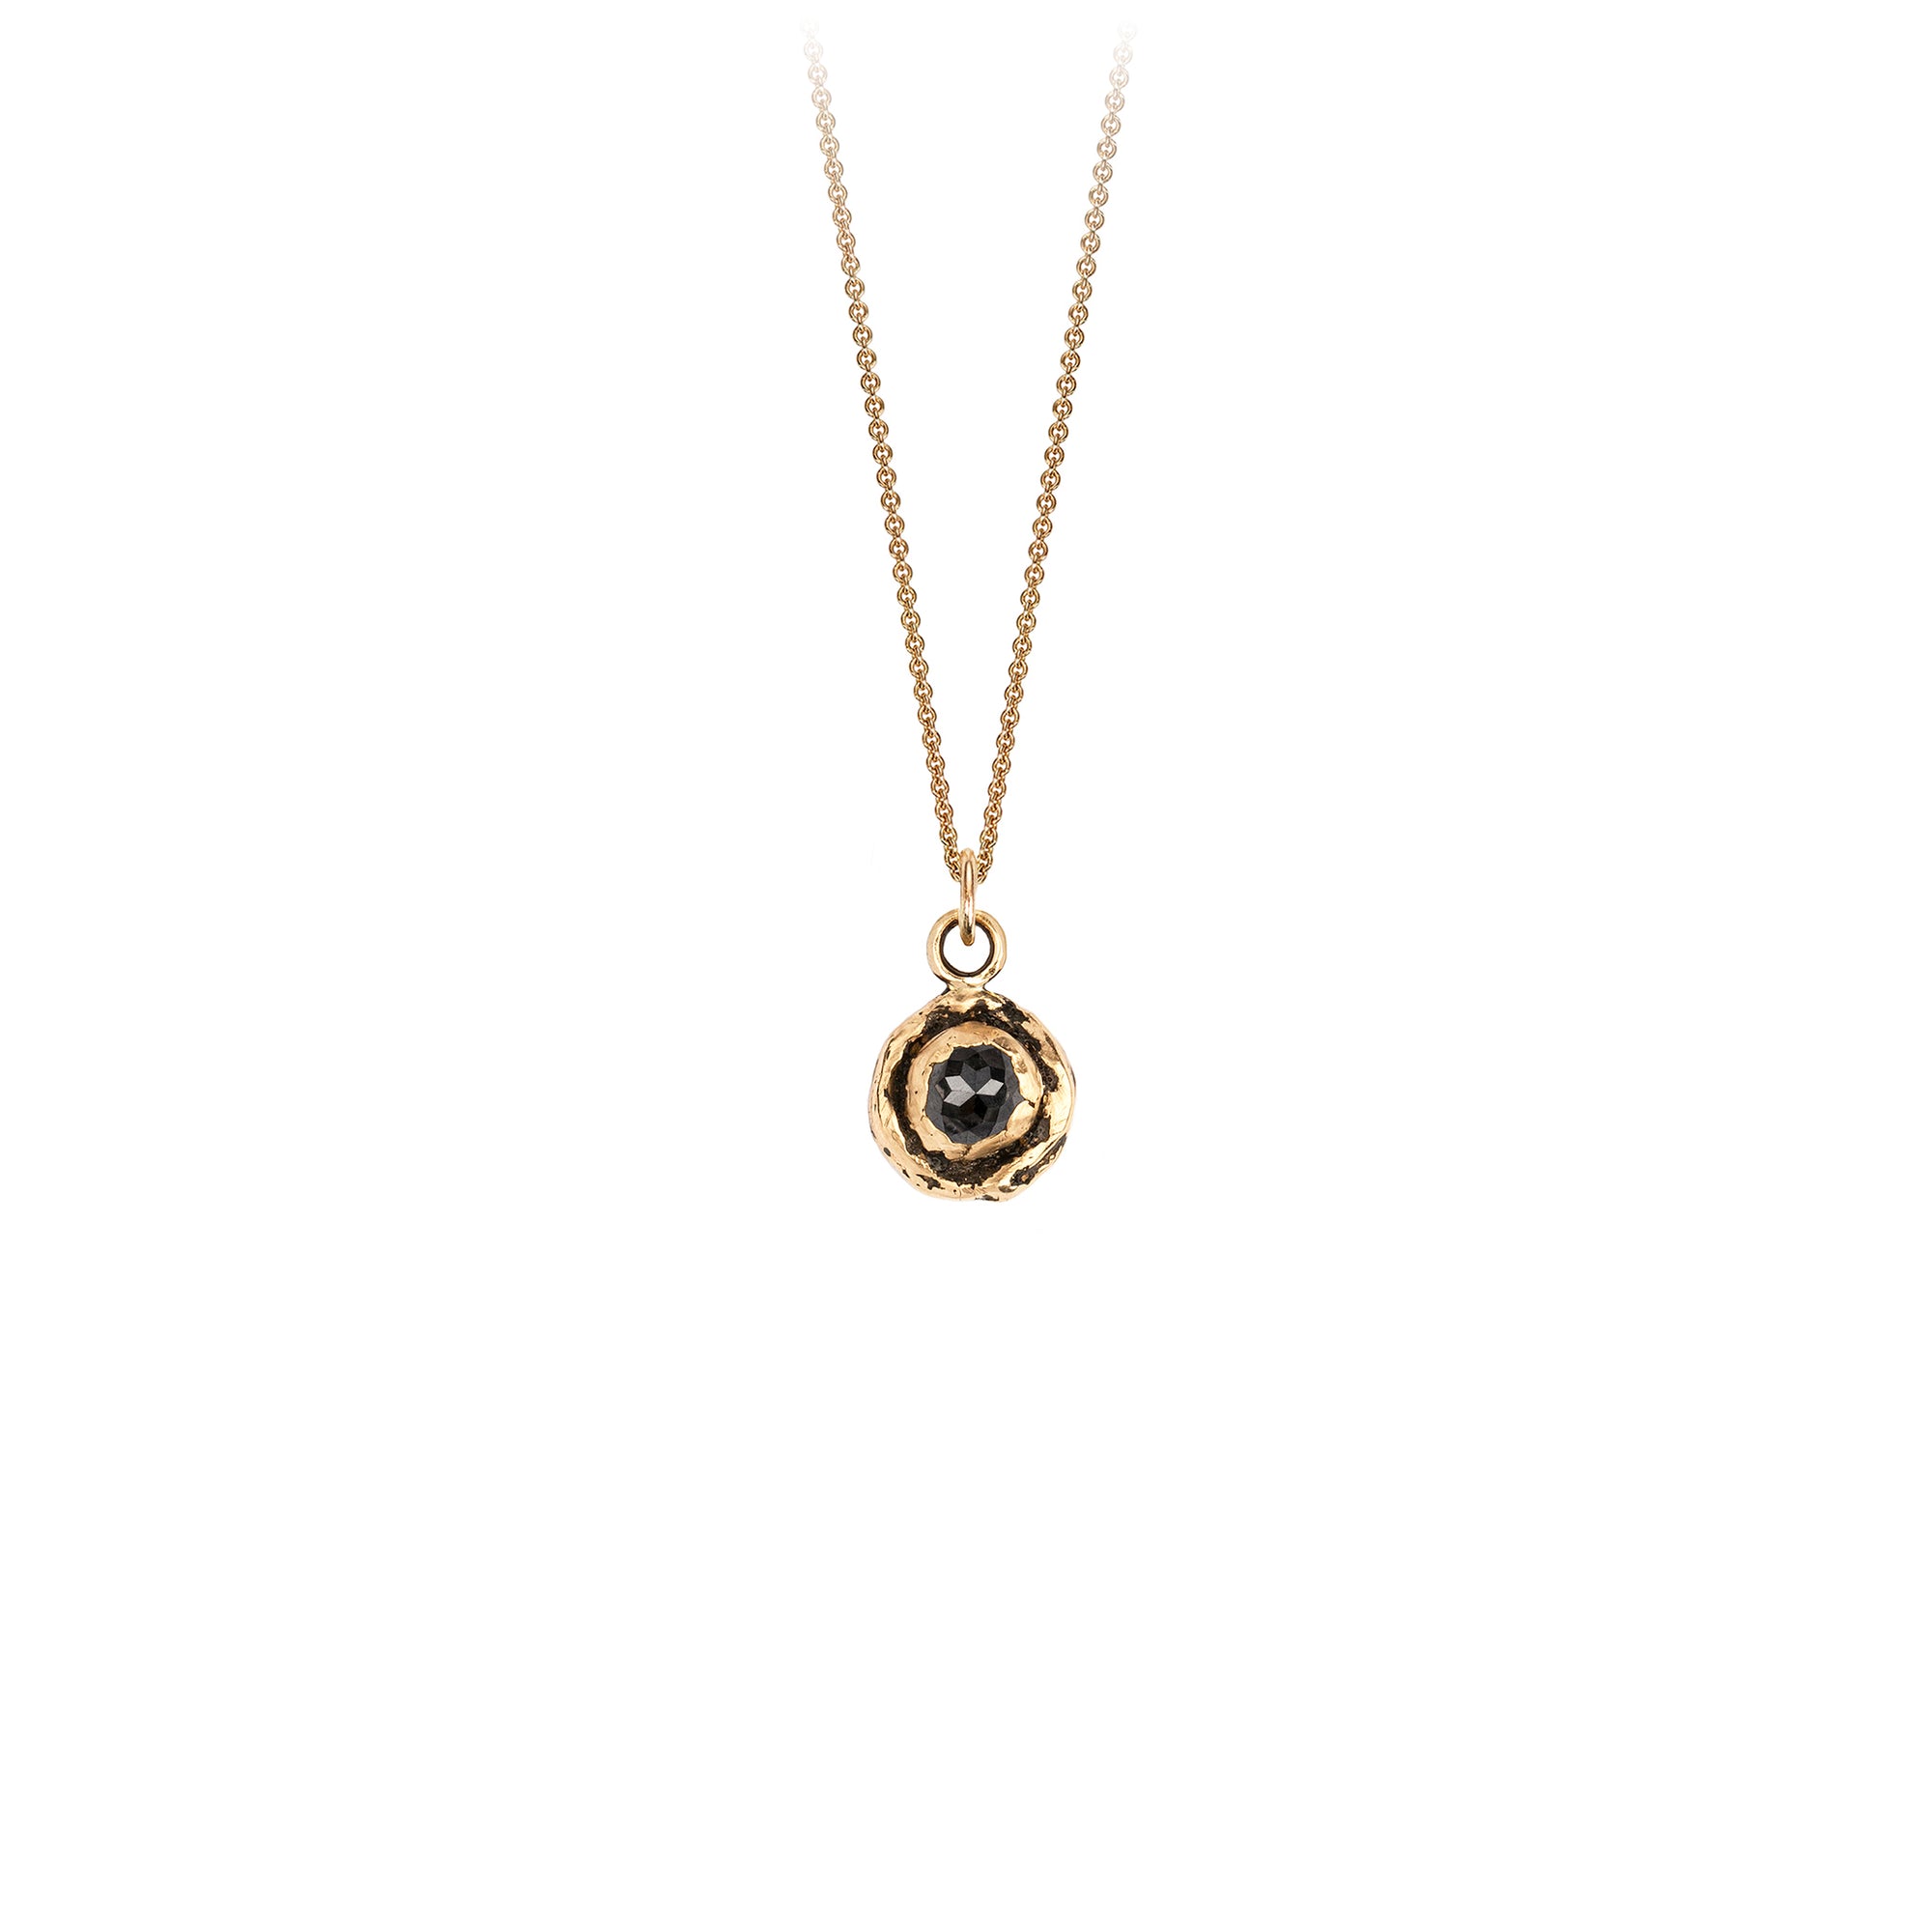 A 14k gold chain featuring a small 14k gold faceted charcoal diamond.